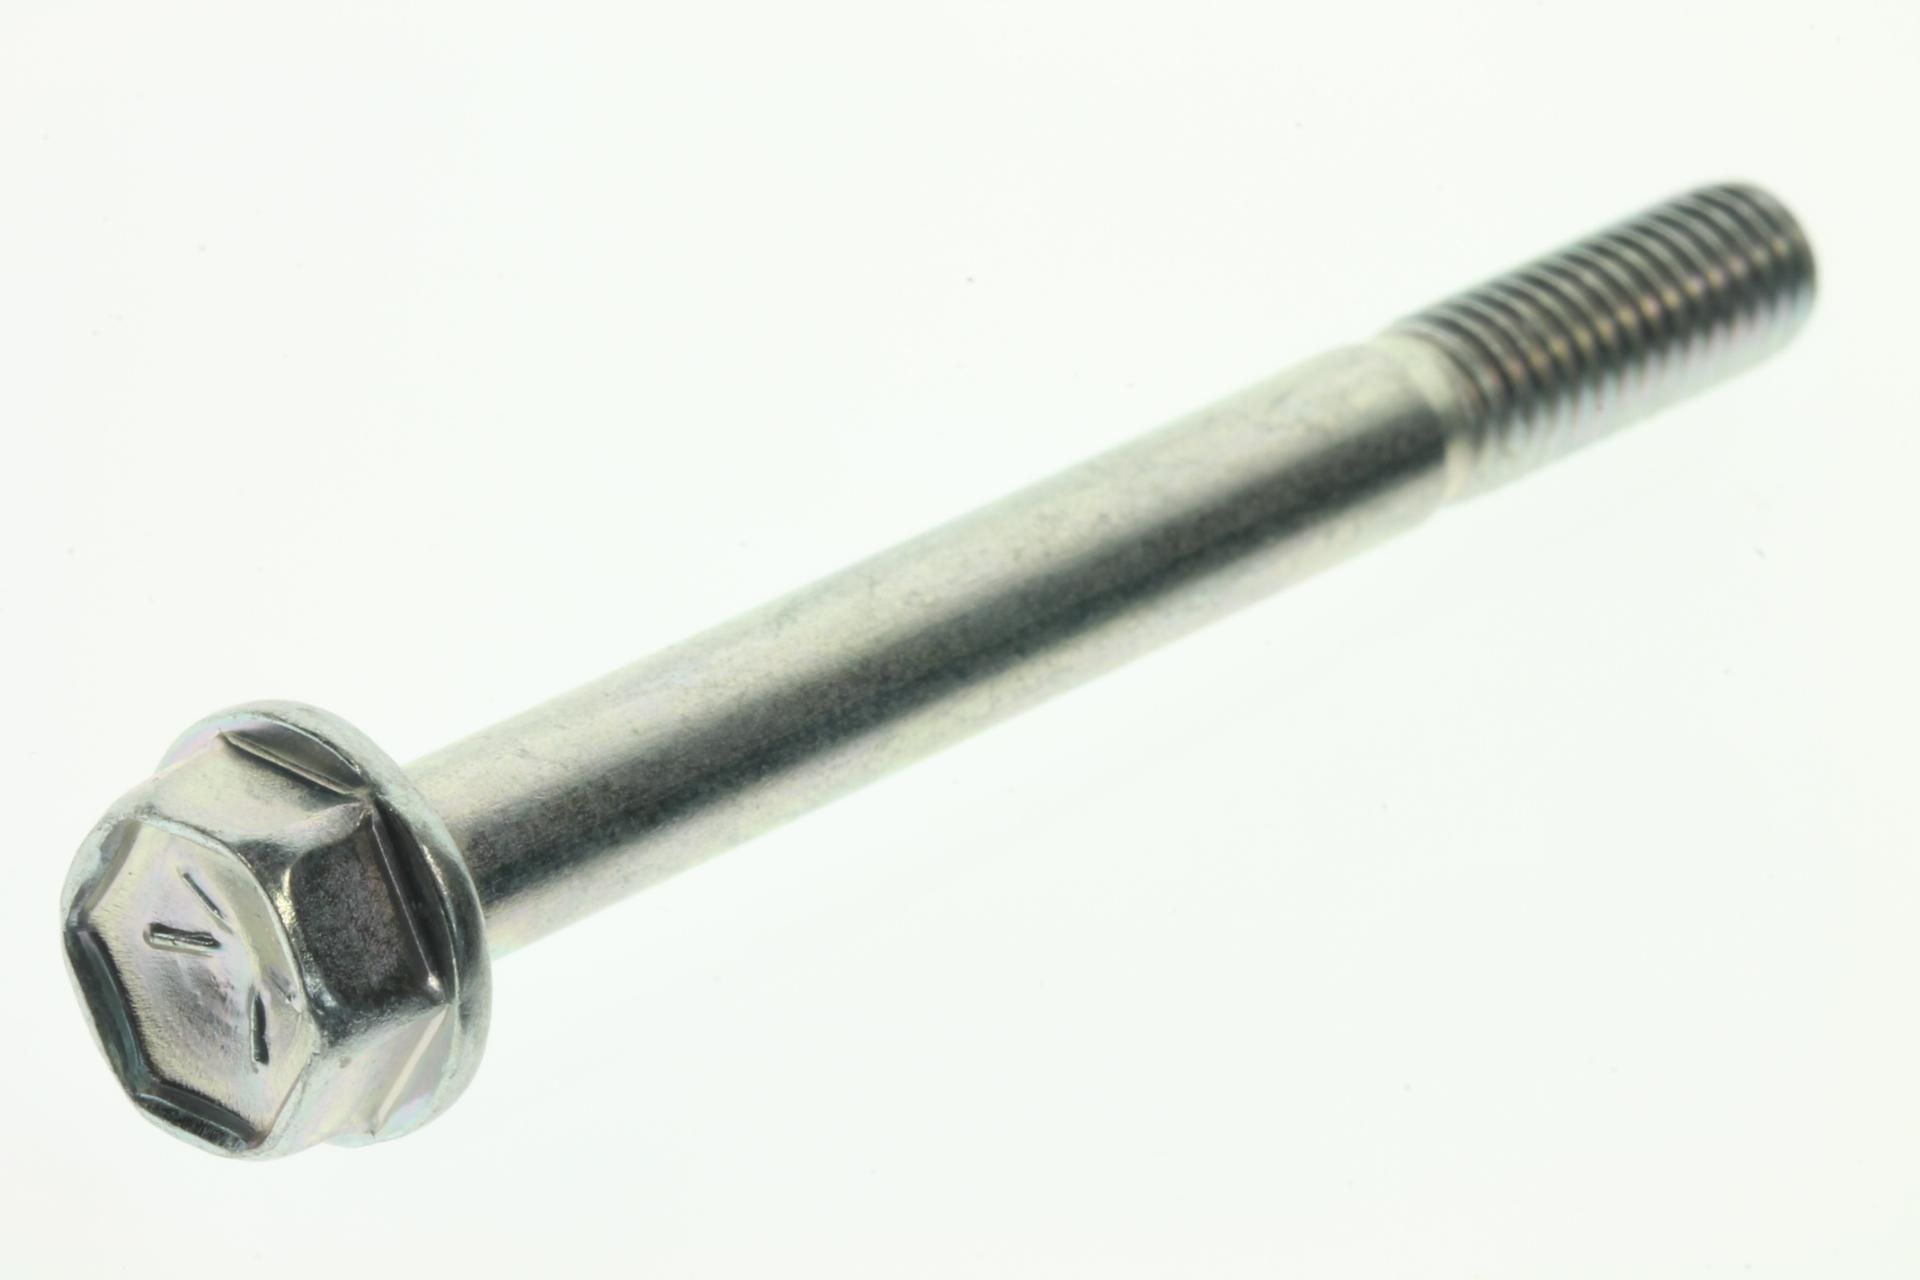 09103-06111 Superseded by 09103-06064 - BOLT 6X60